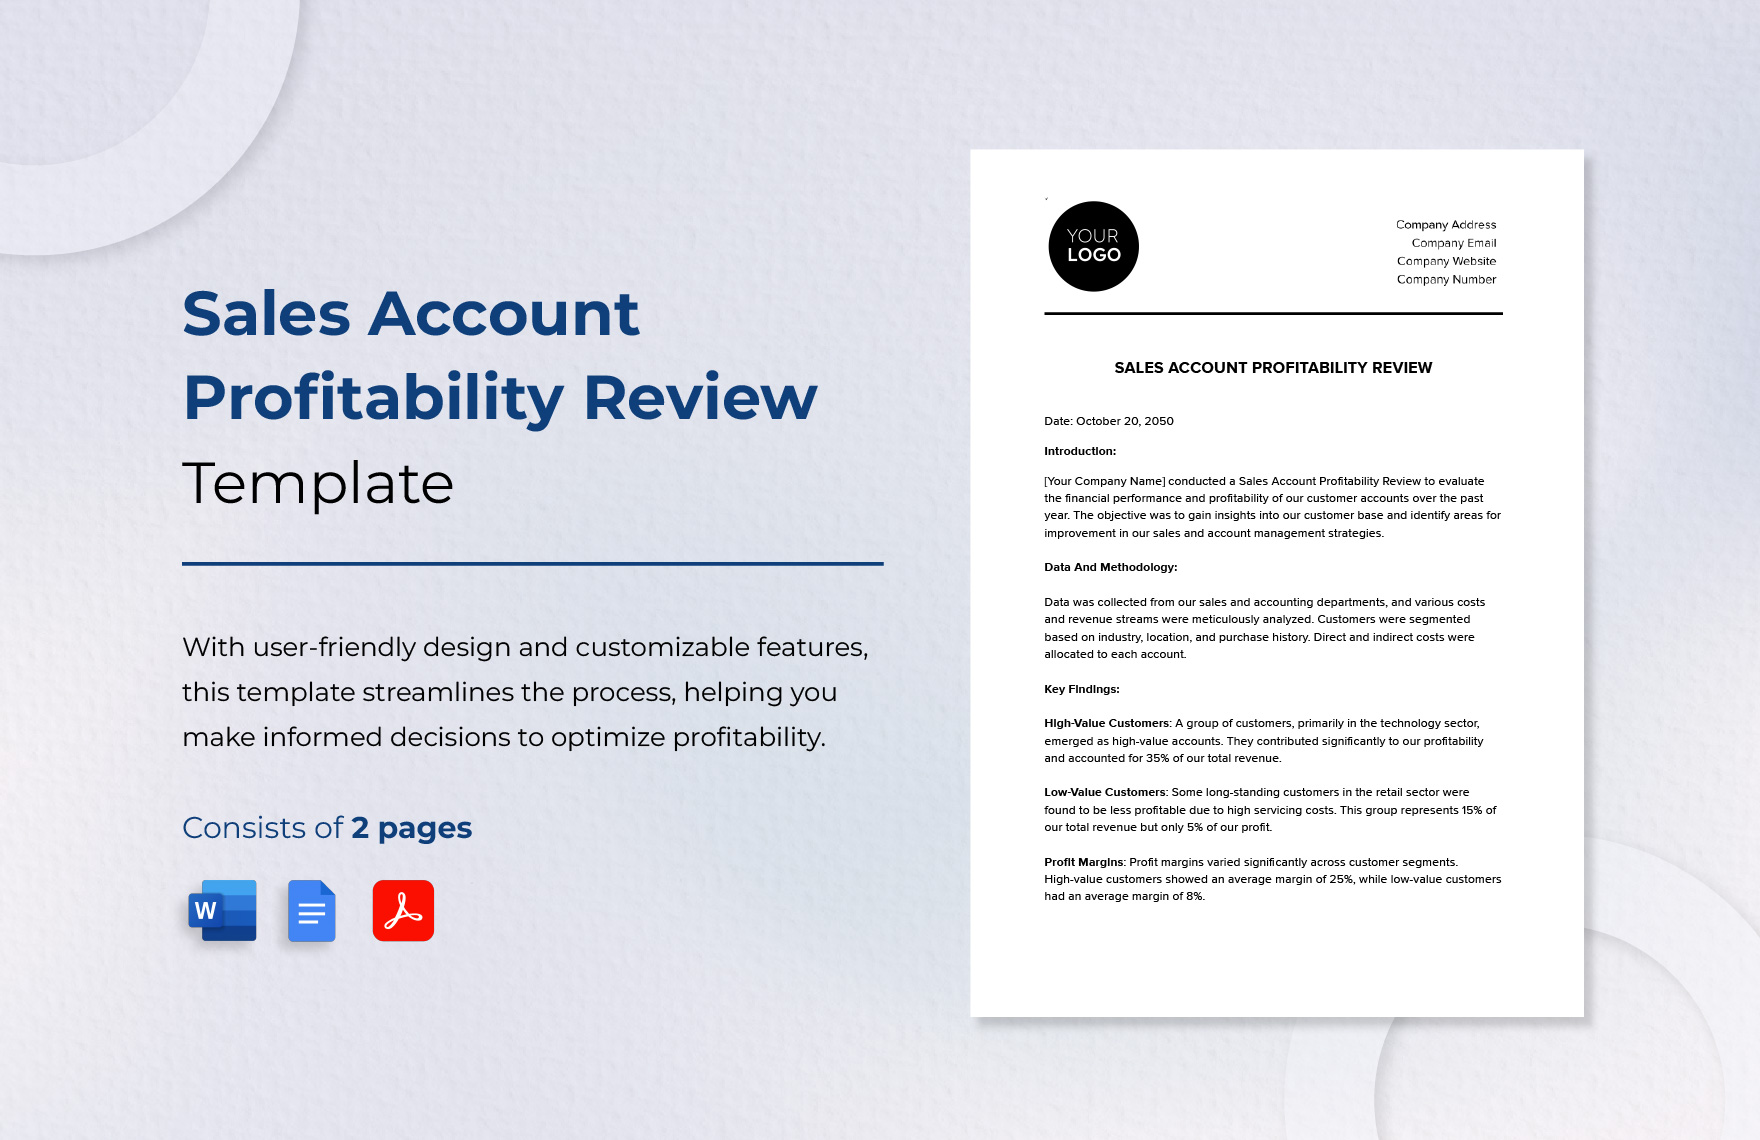 Sales Account Profitability Review Template in Word, Google Docs, PDF